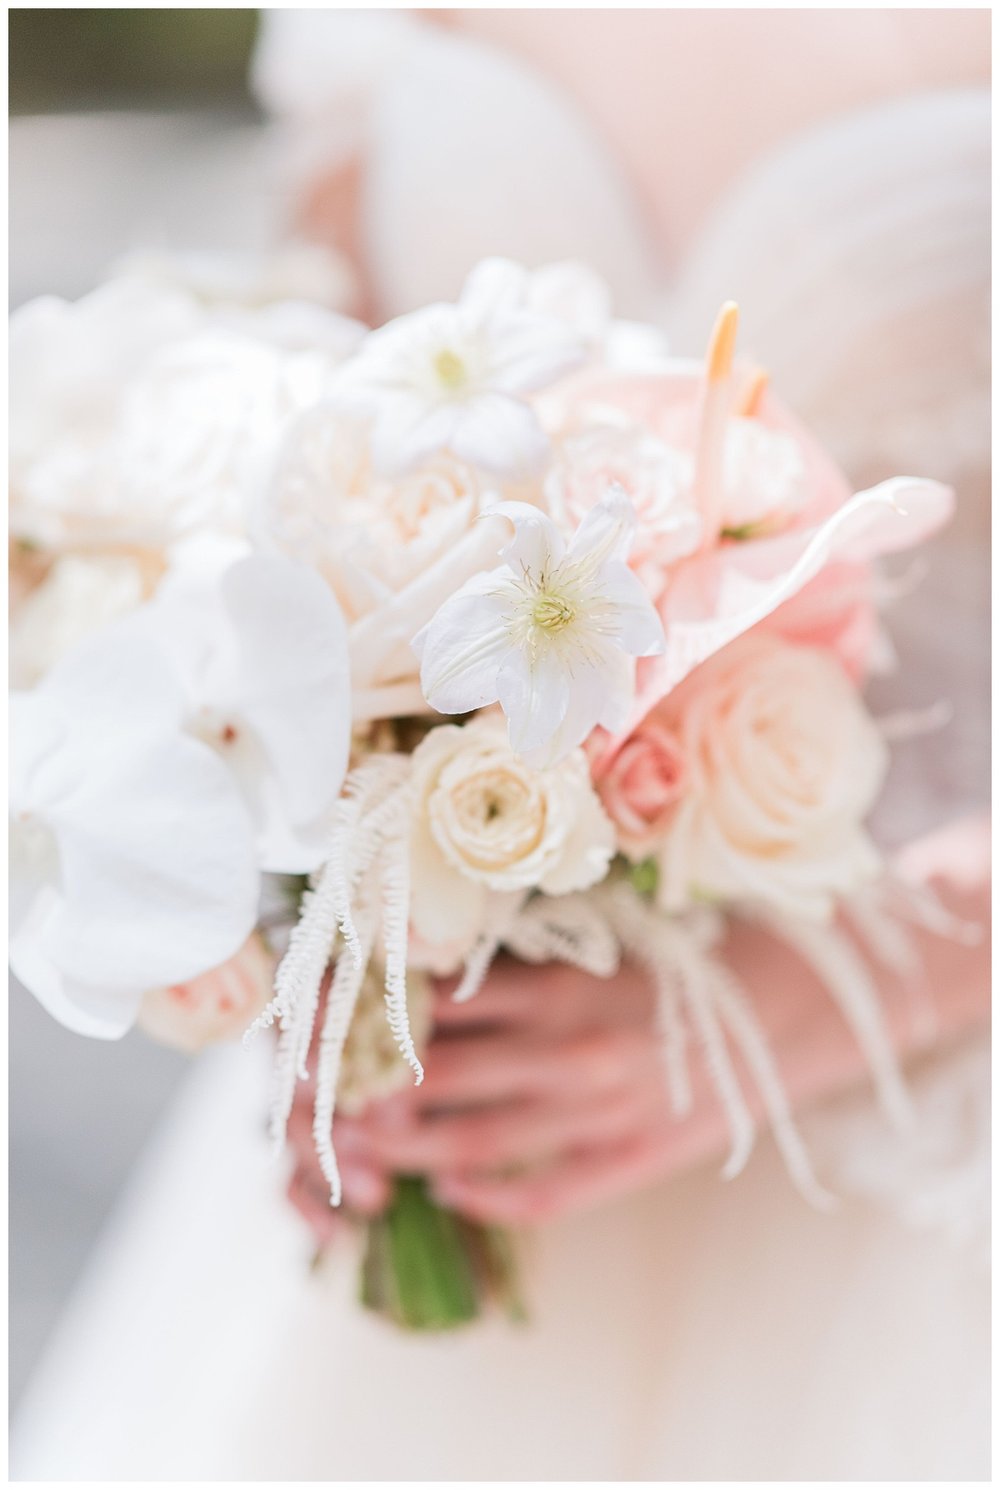 detailed image of white and blush bouquet with brides hands holding it